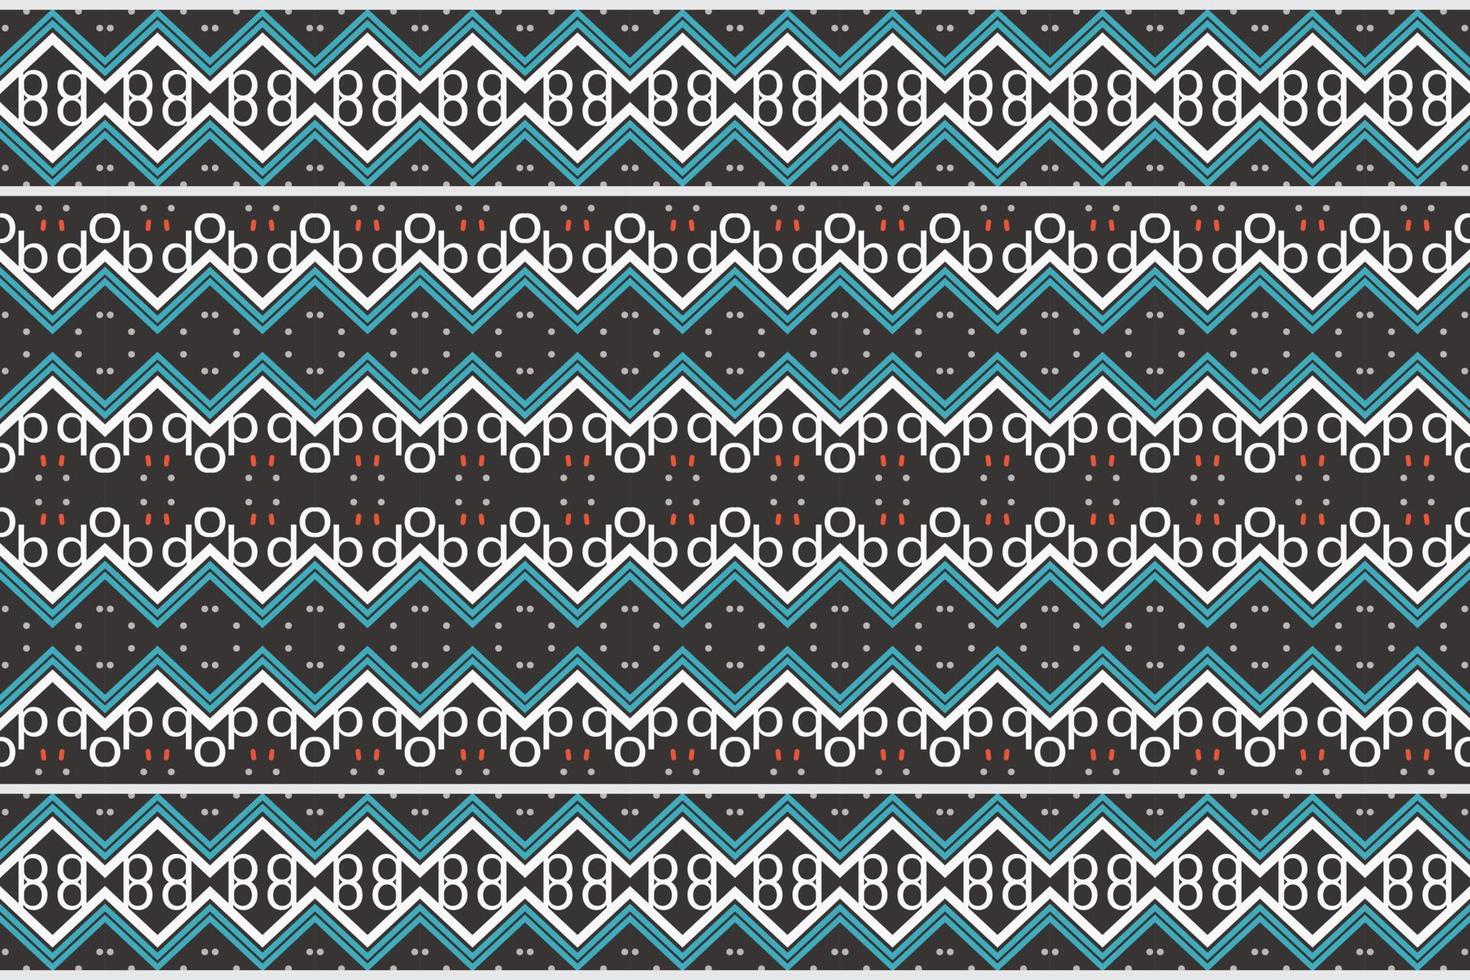 African Ethnic Damask embroidery background. geometric ethnic oriental pattern traditional. Ethnic Aztec style abstract vector illustration. design for print texture,fabric,saree,sari,carpet.